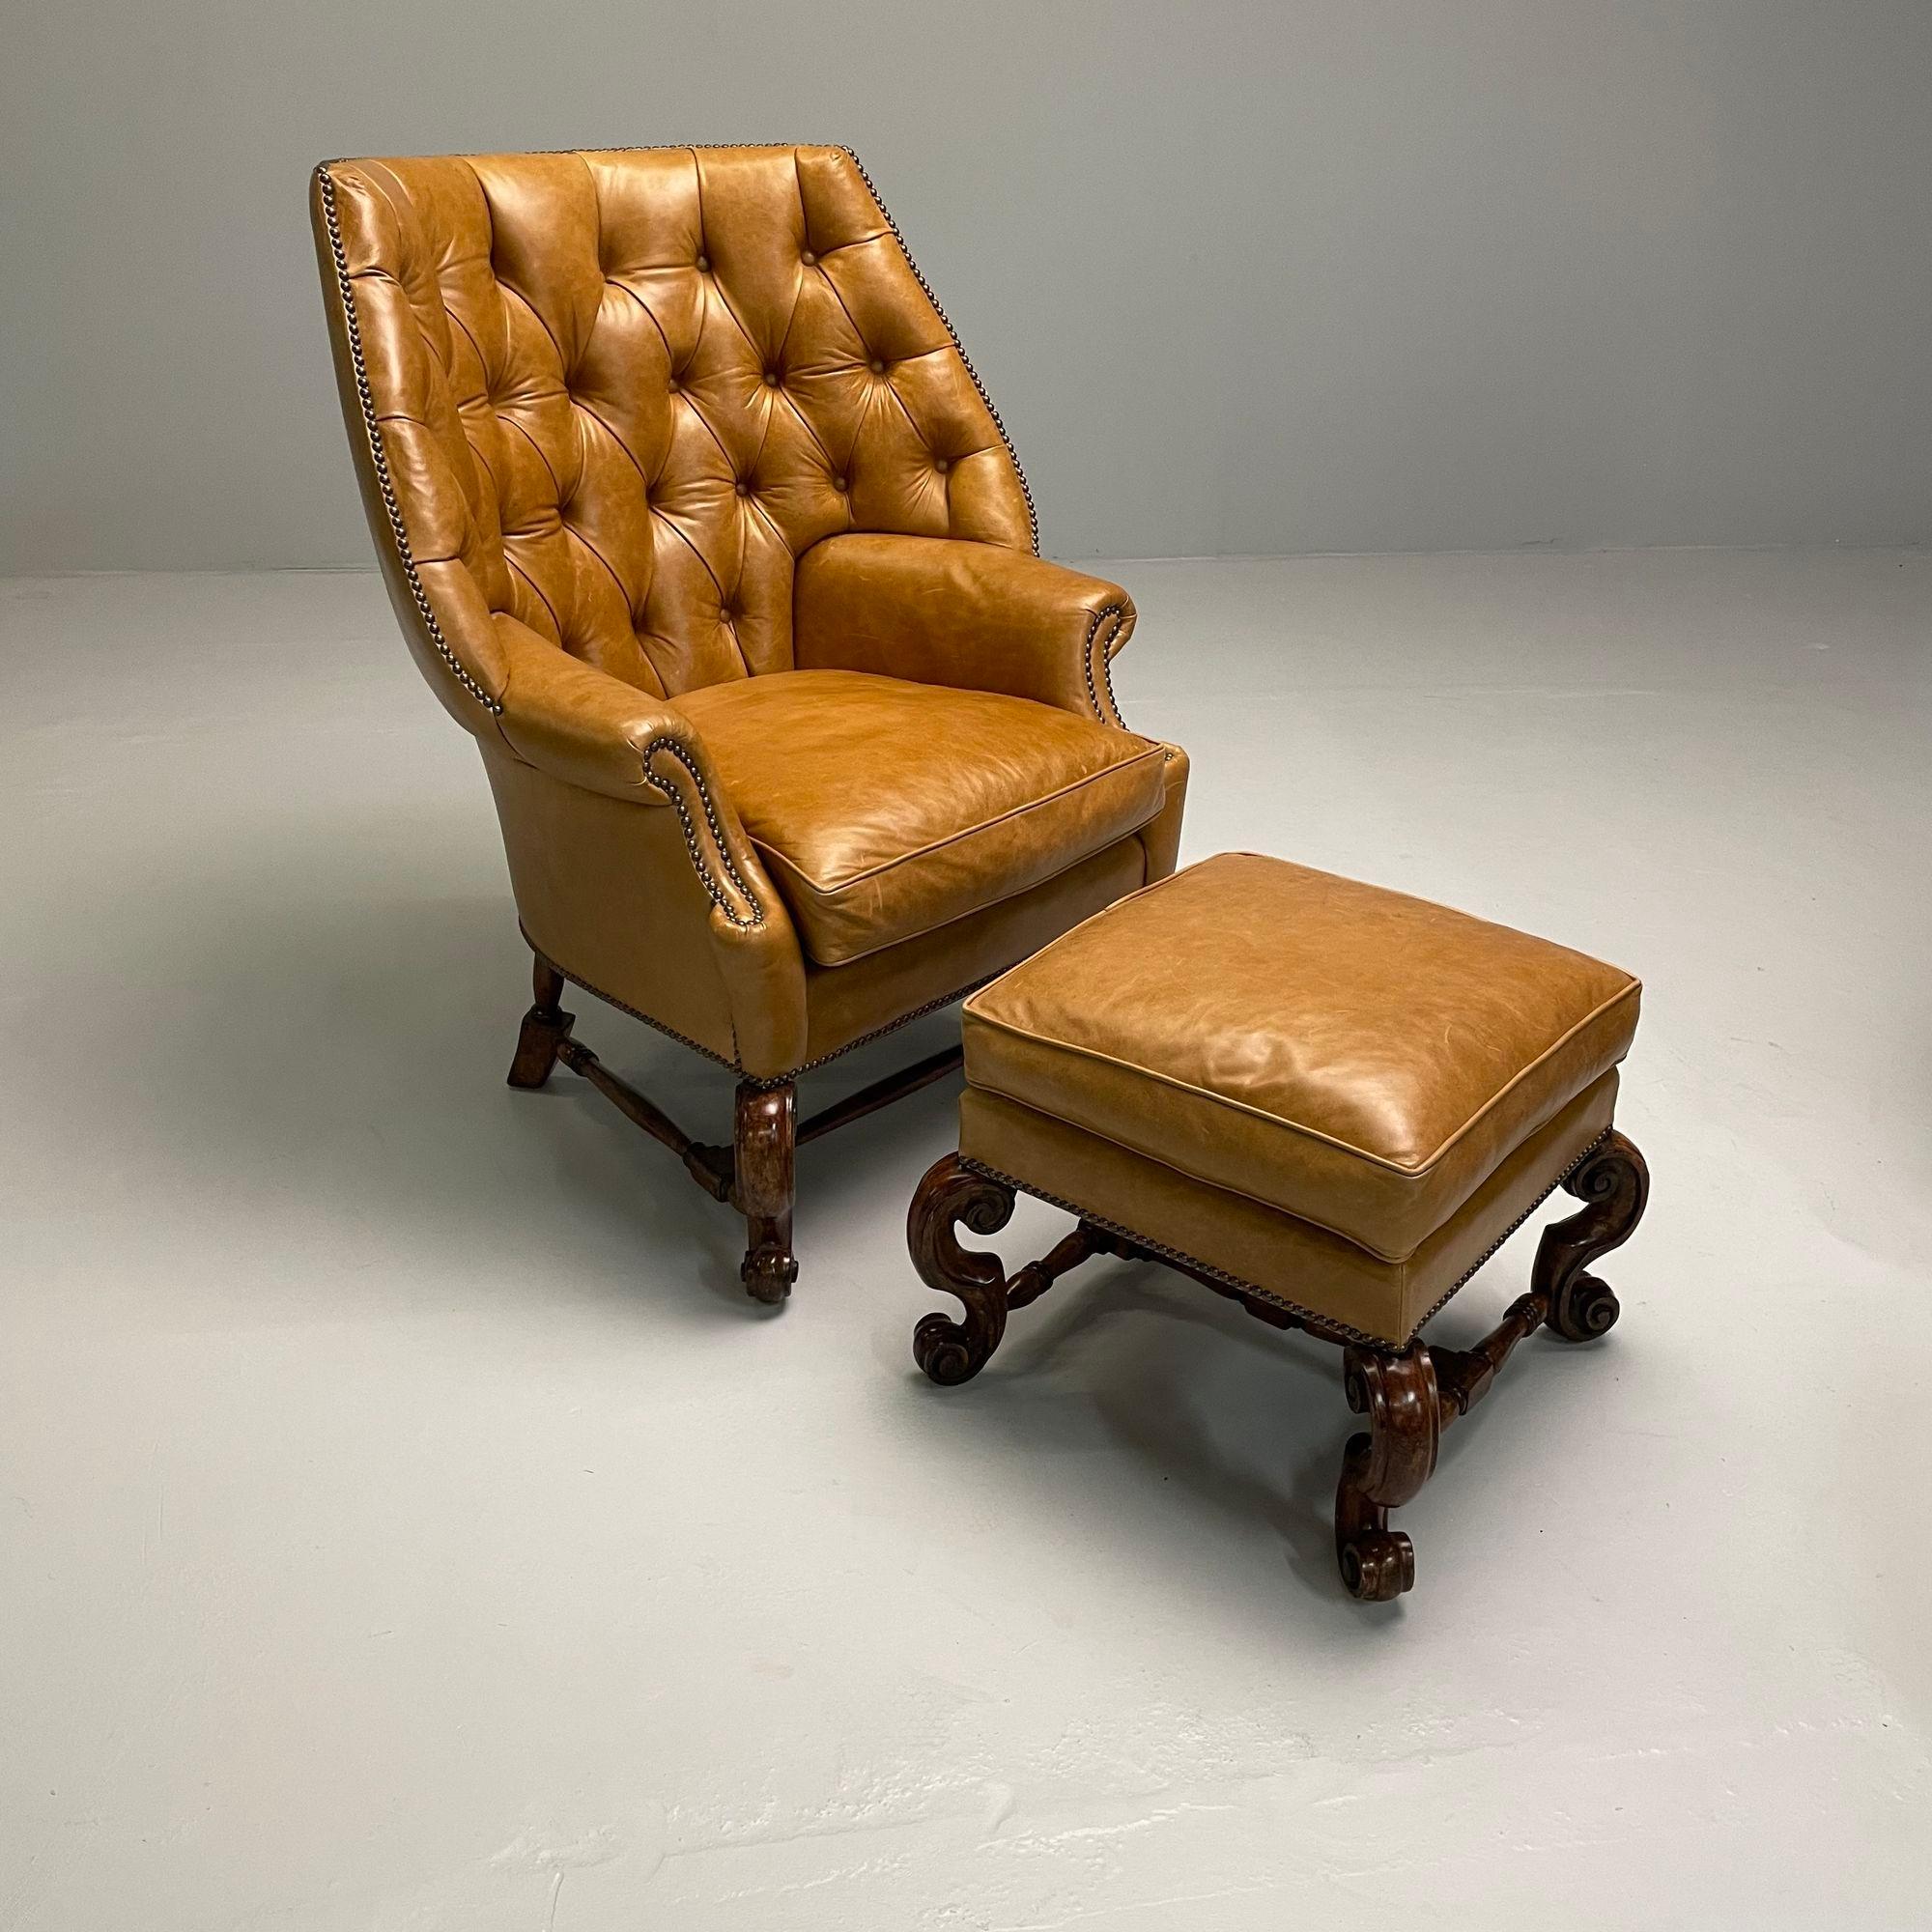 Contemporary Georgian, Large Tufted Lounge Chairs and Ottomans, Tan Leather, USA, 2000s For Sale